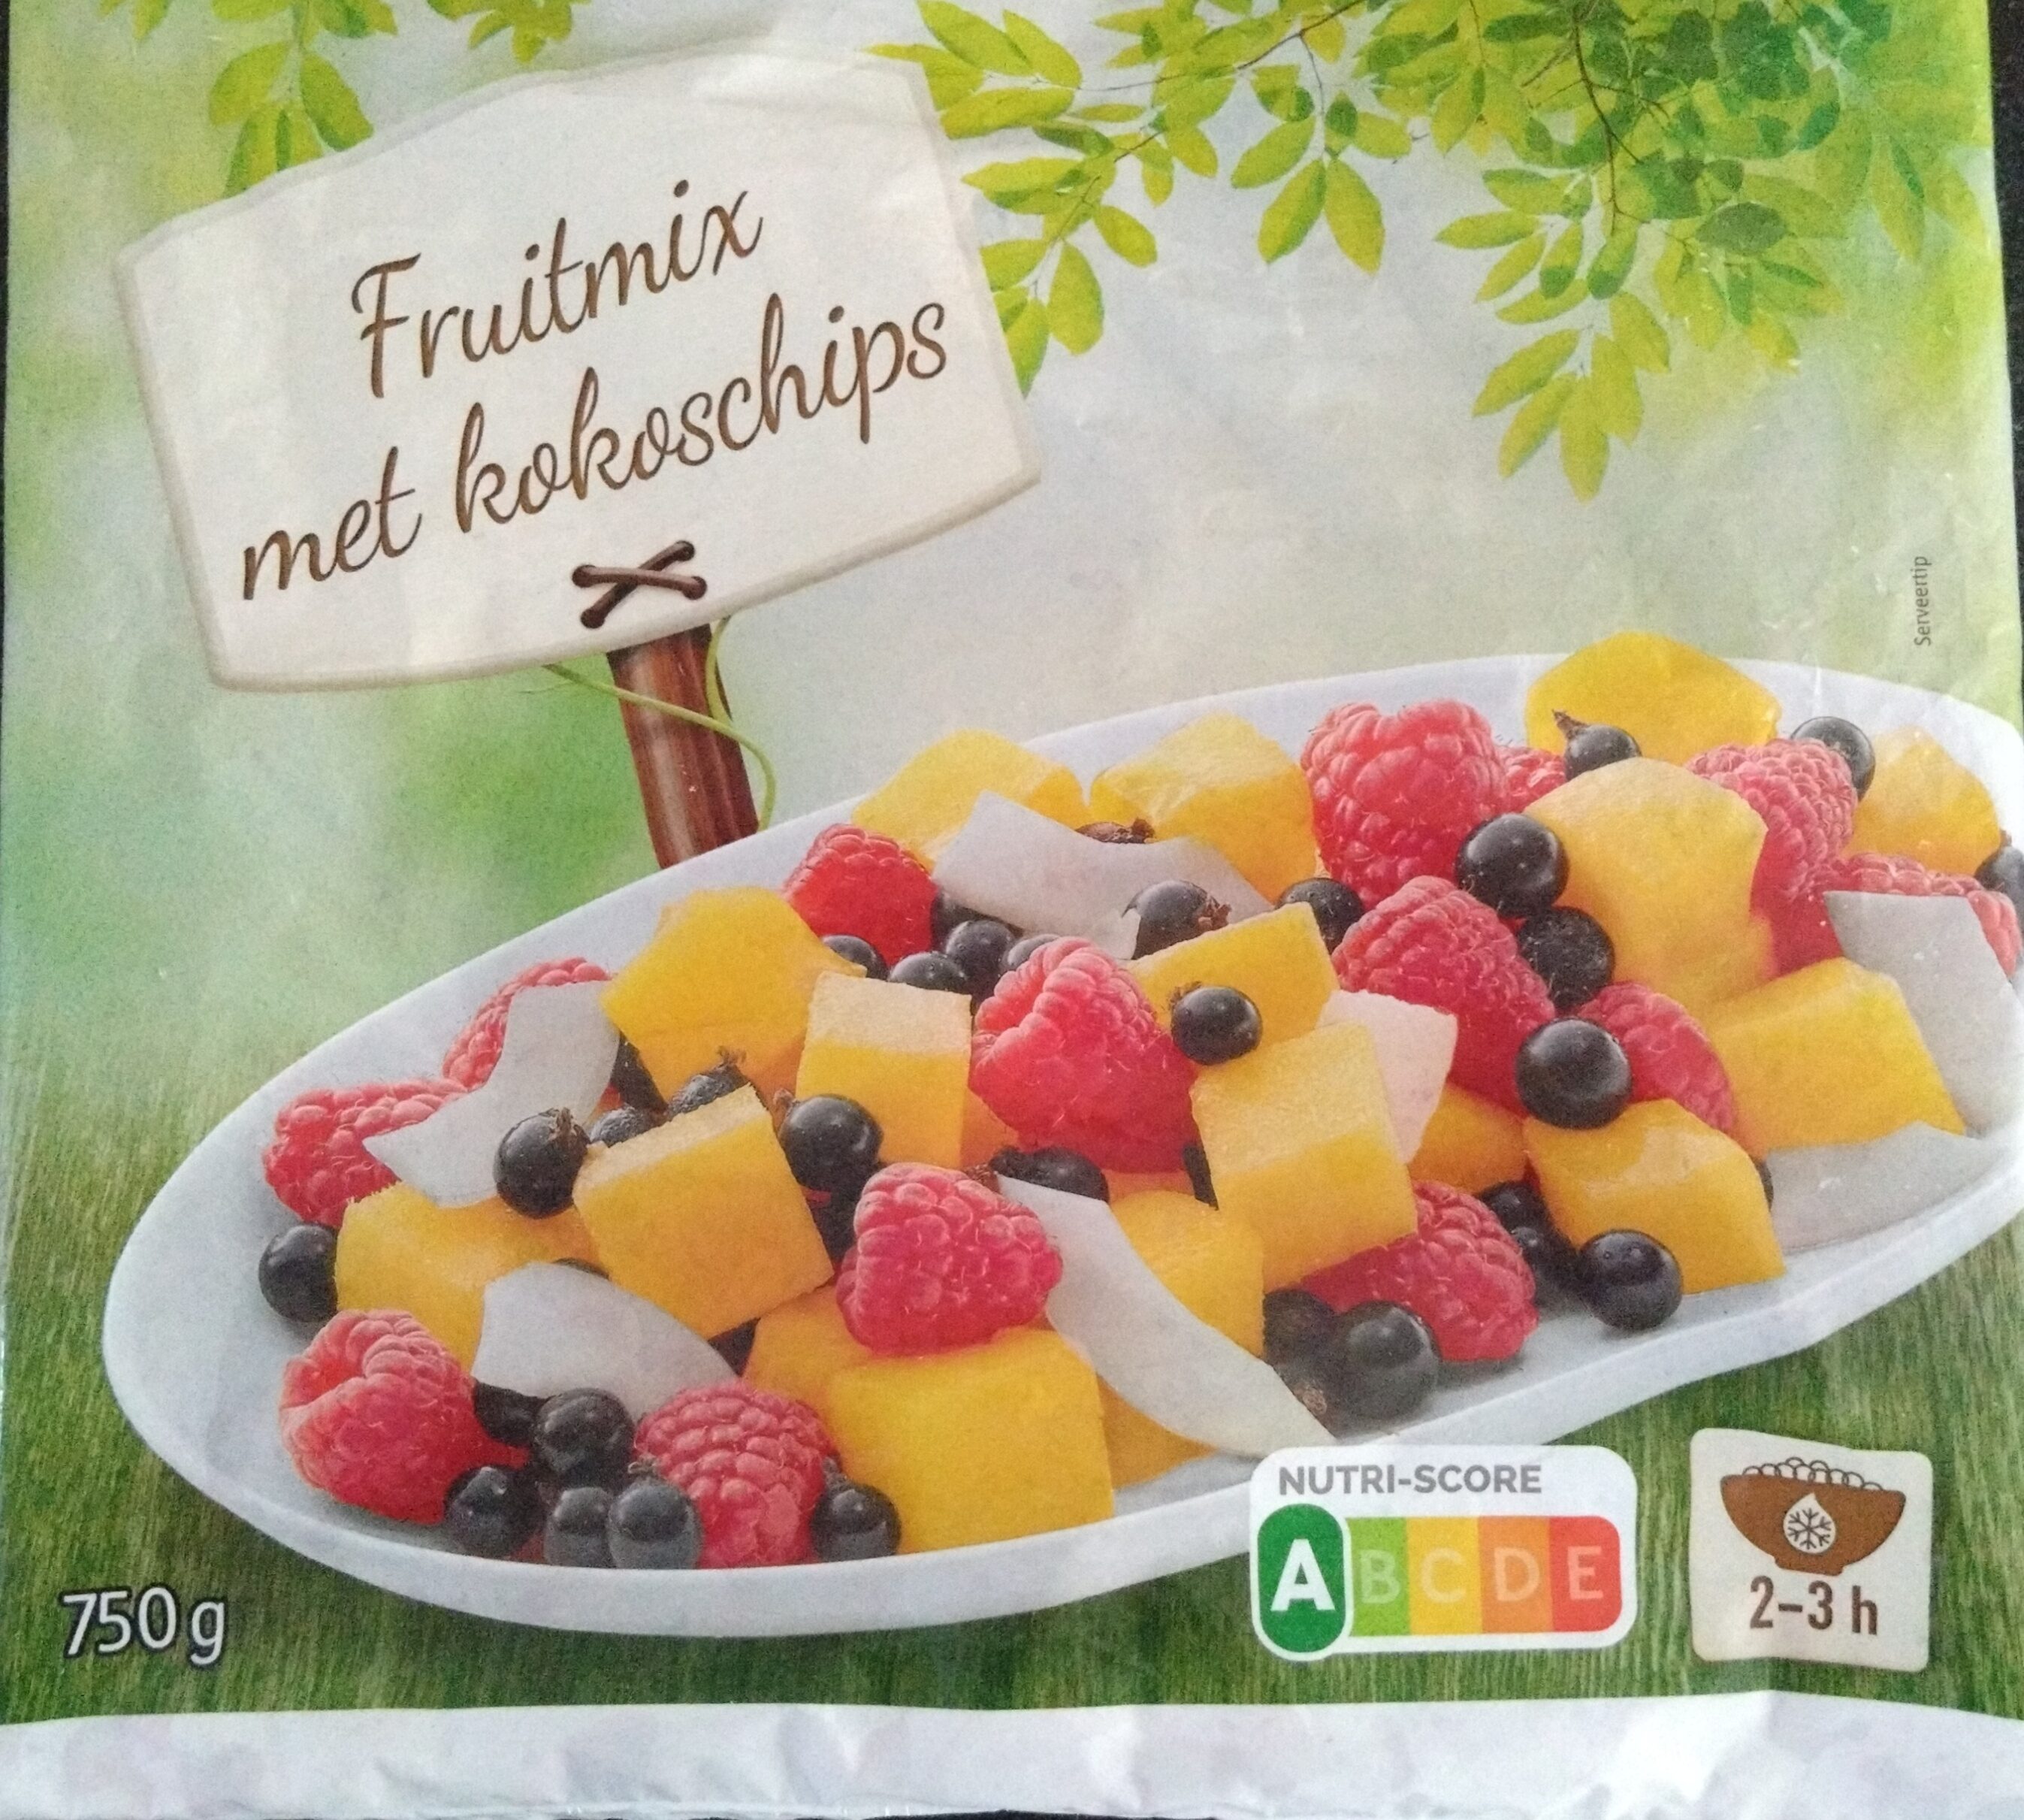 Fruit mix with coconut flakes - Product